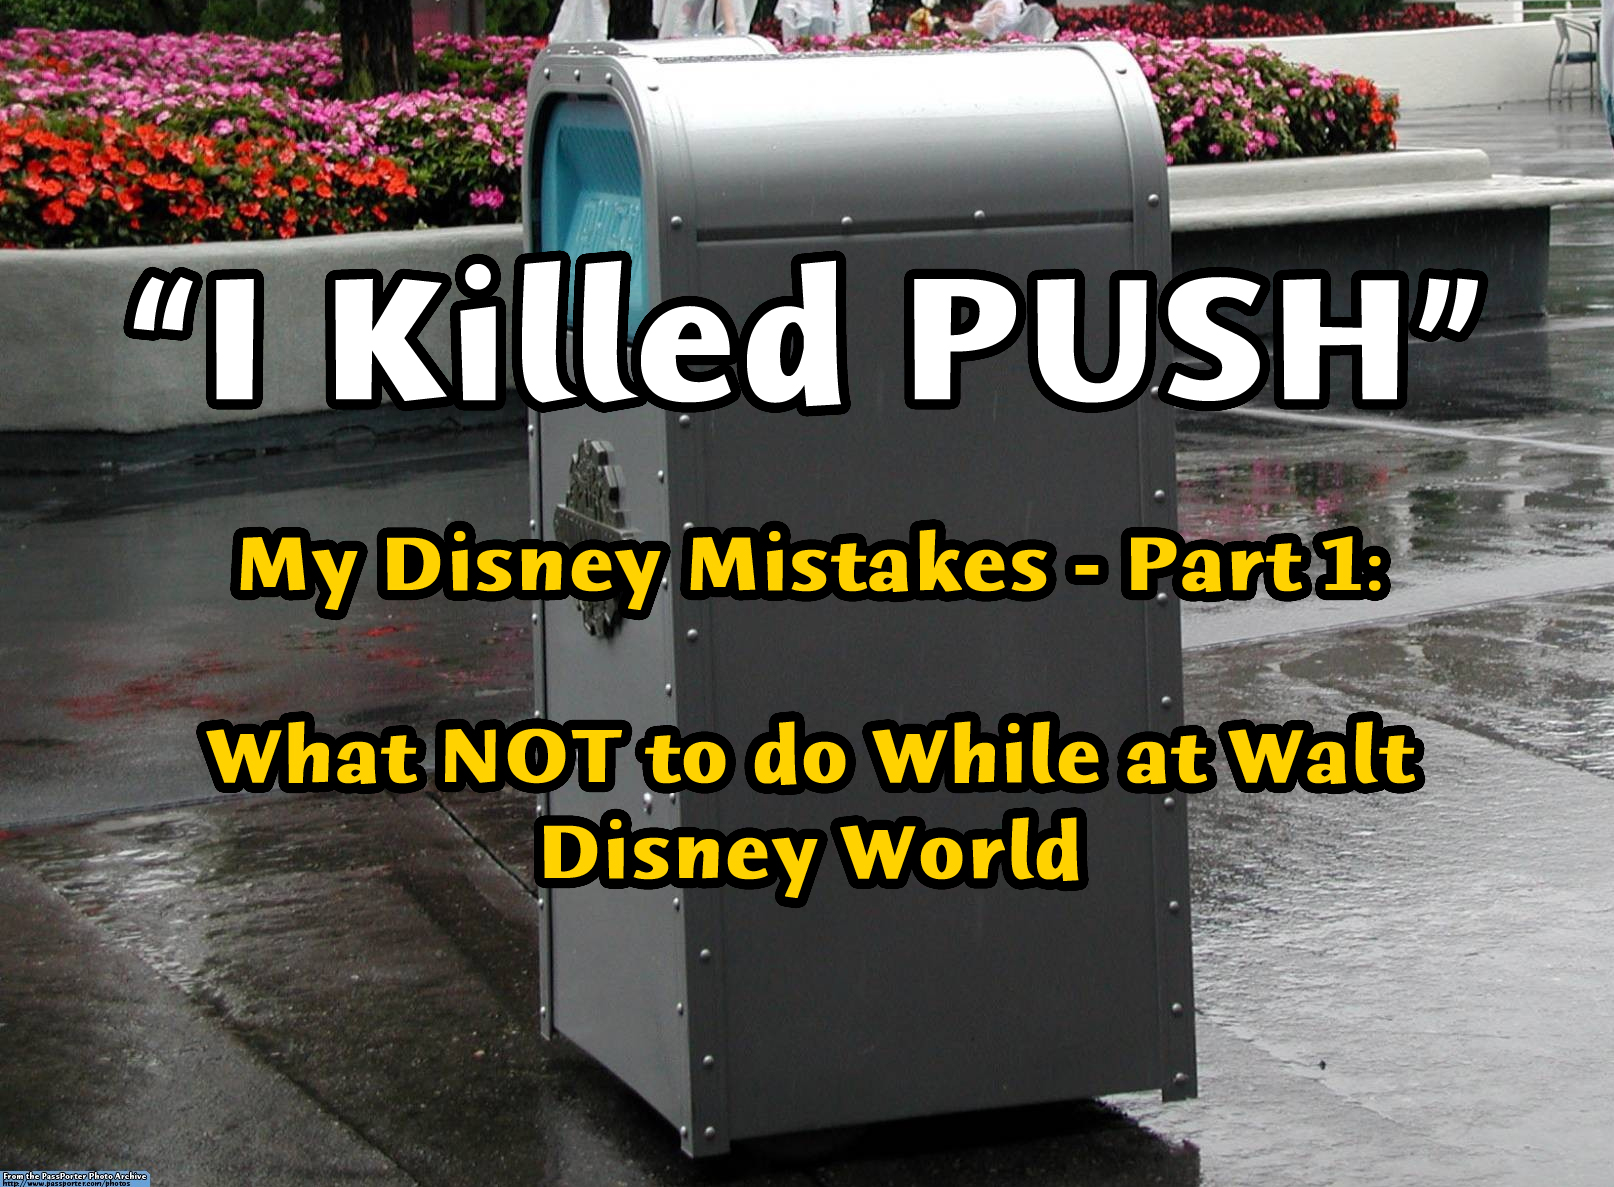 Learn what NOT to do while at Walt Disney World | PassPorter.com